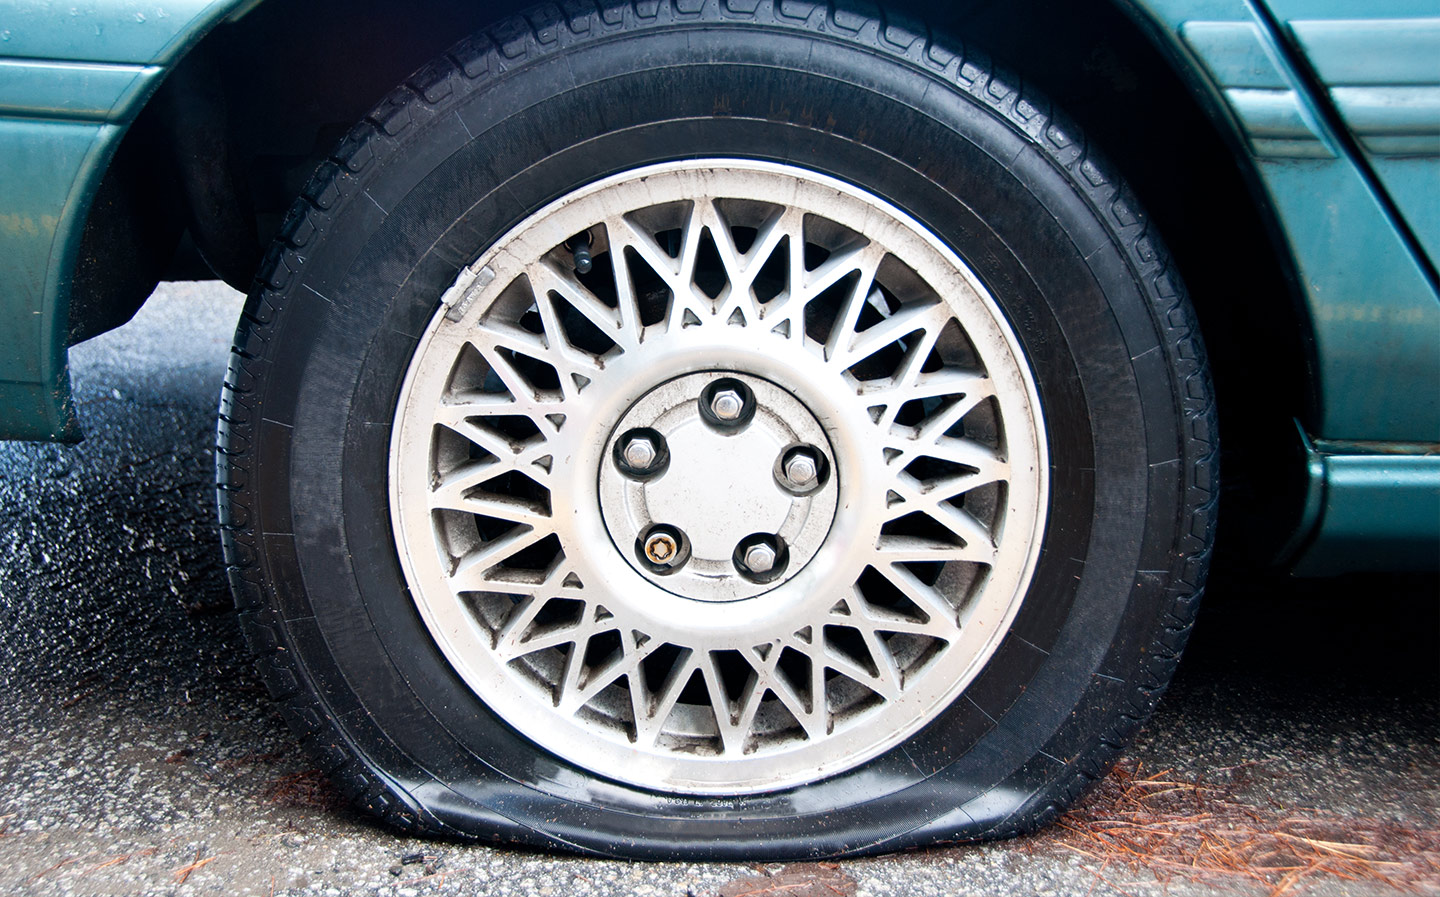 Car Clinic: I've lost my locking wheel nut key — how can I change a flat tyre?